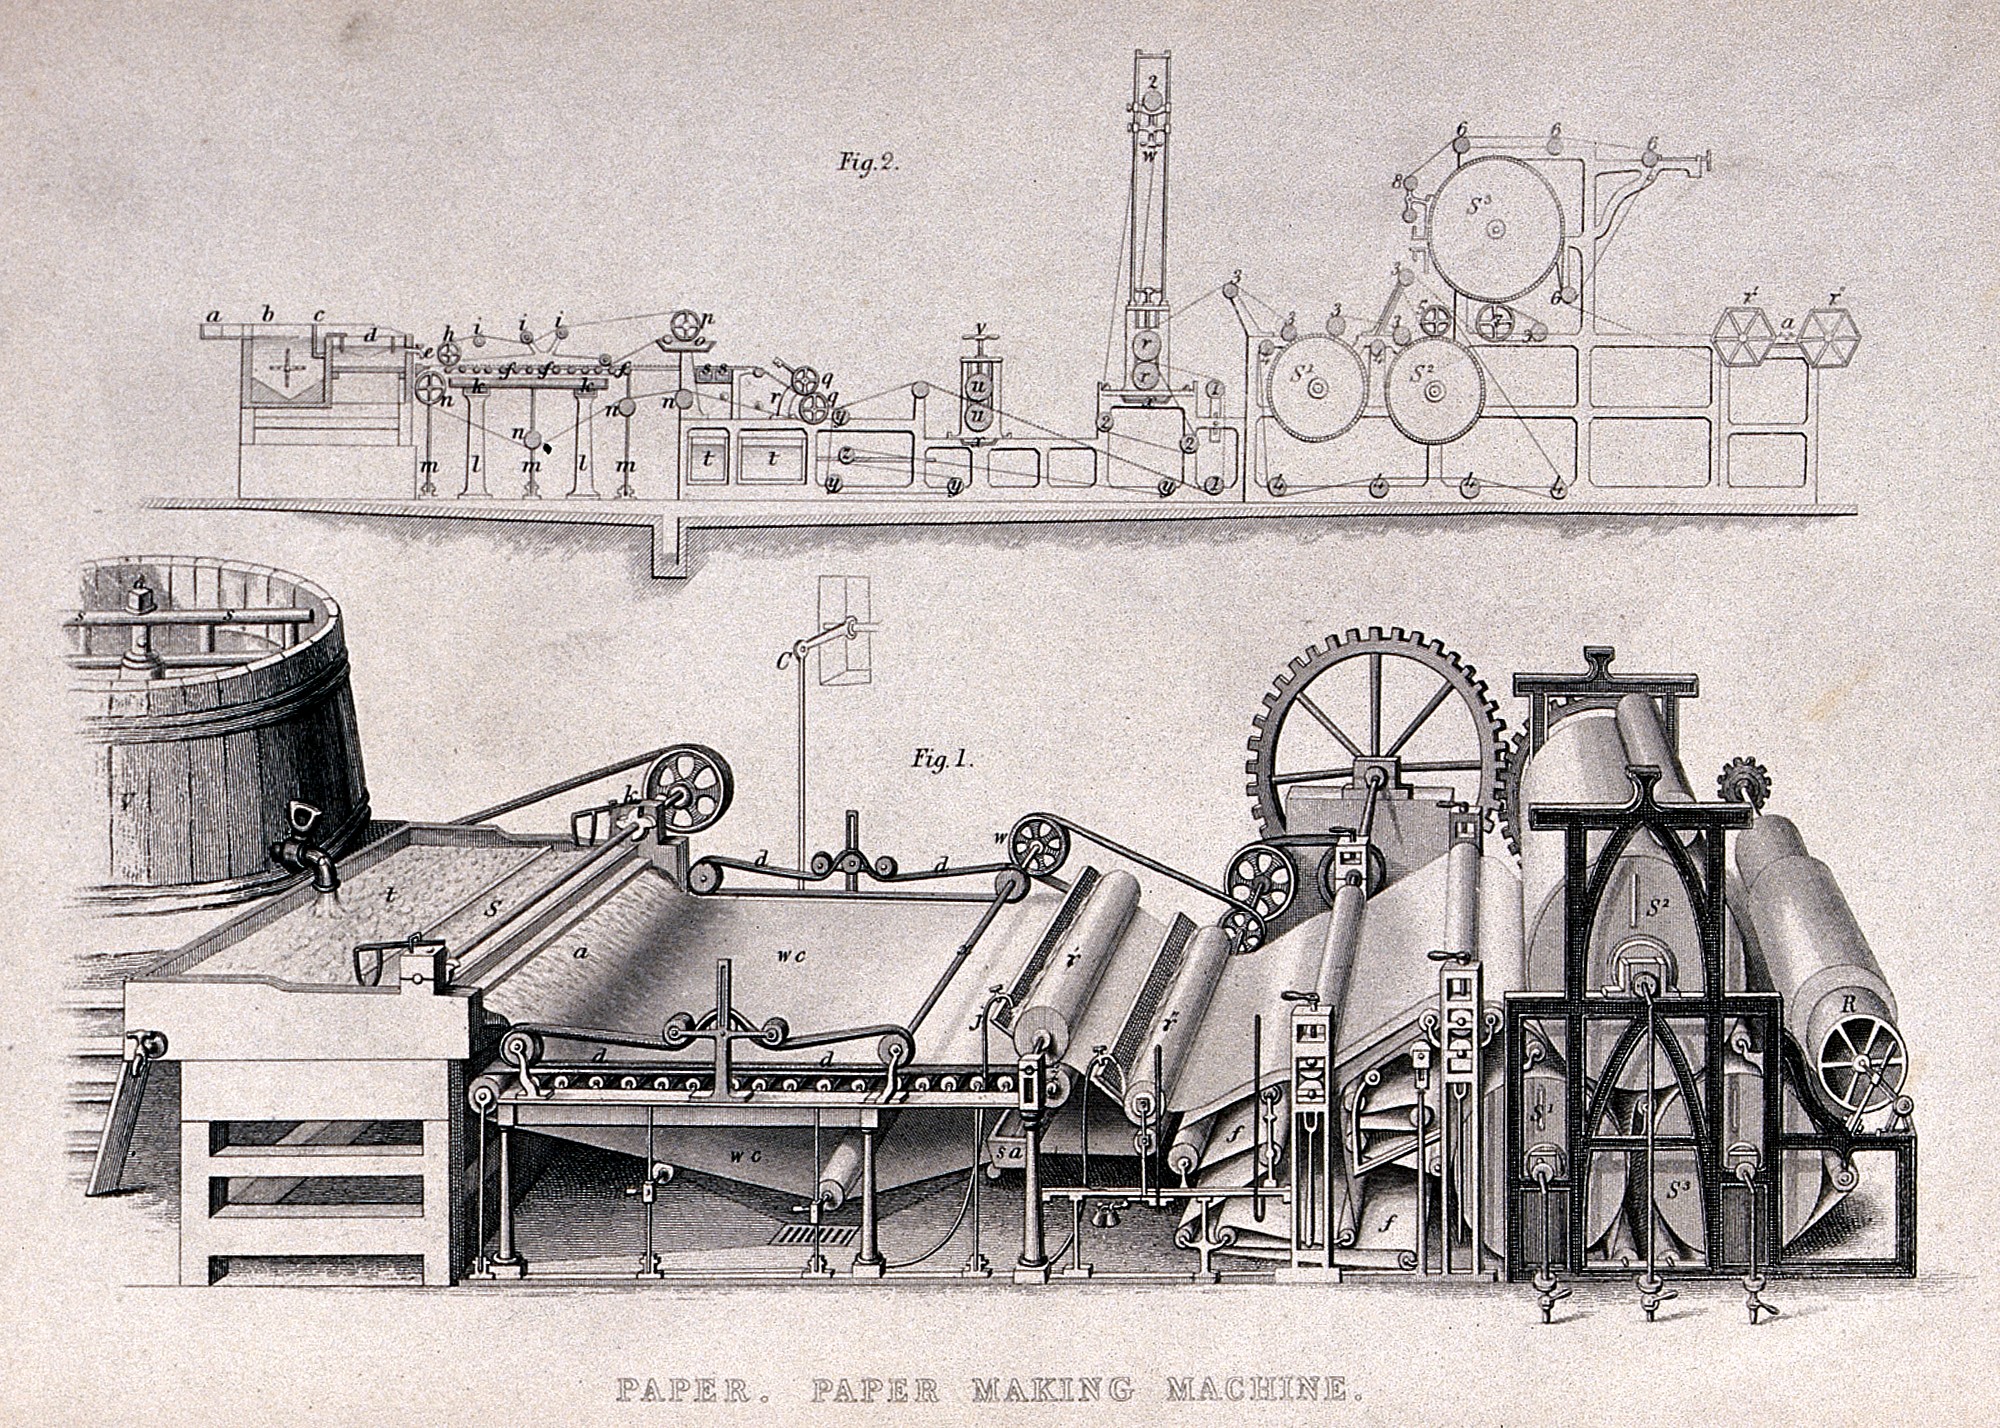 V0023749 Paper making machine: a schematic side elevation (top), and